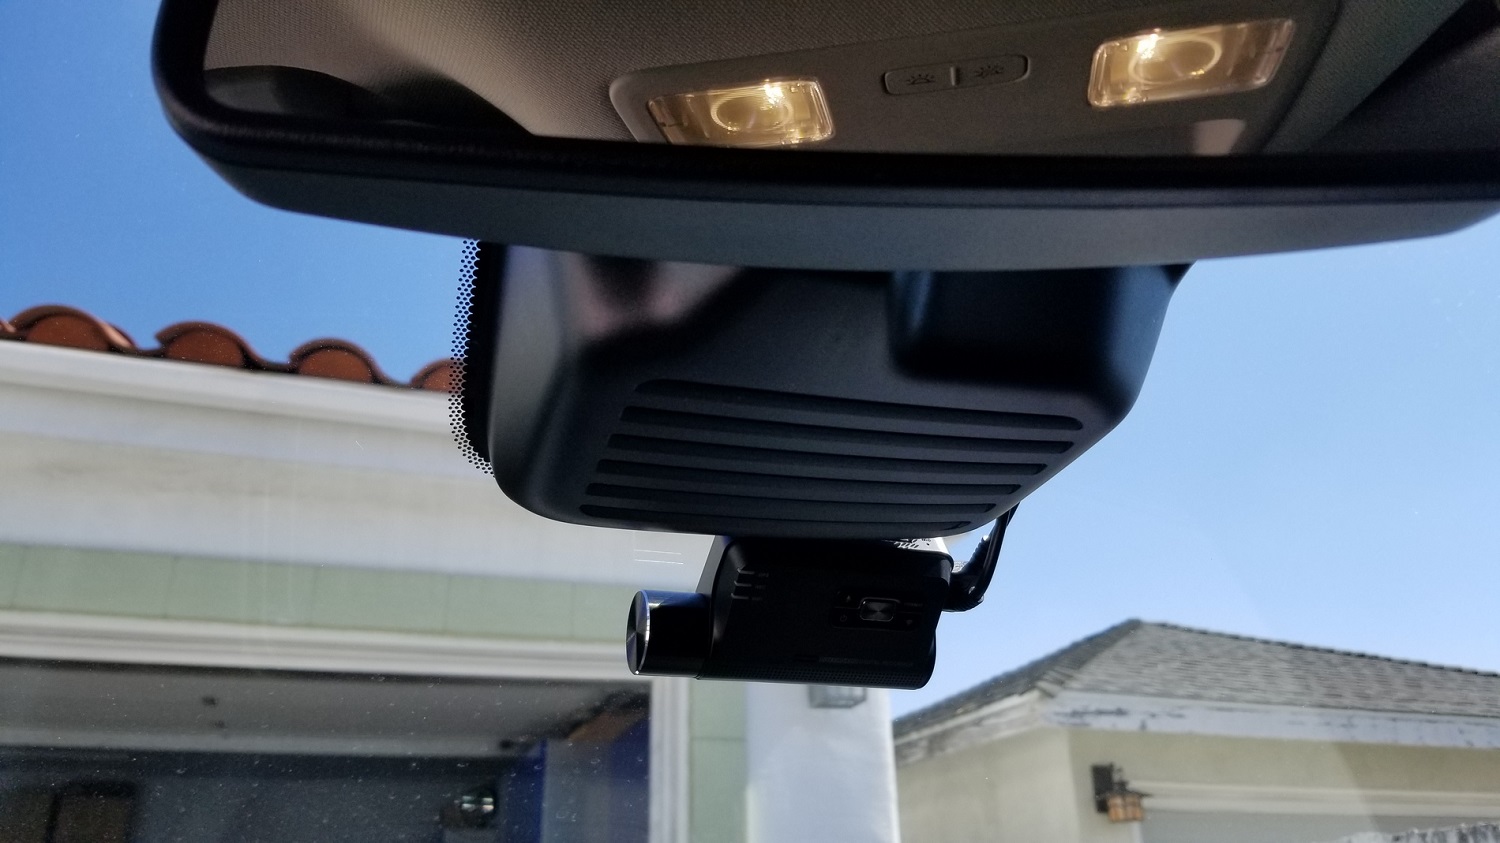 Vehicles Offer Dash Cams In The Future: Opinion